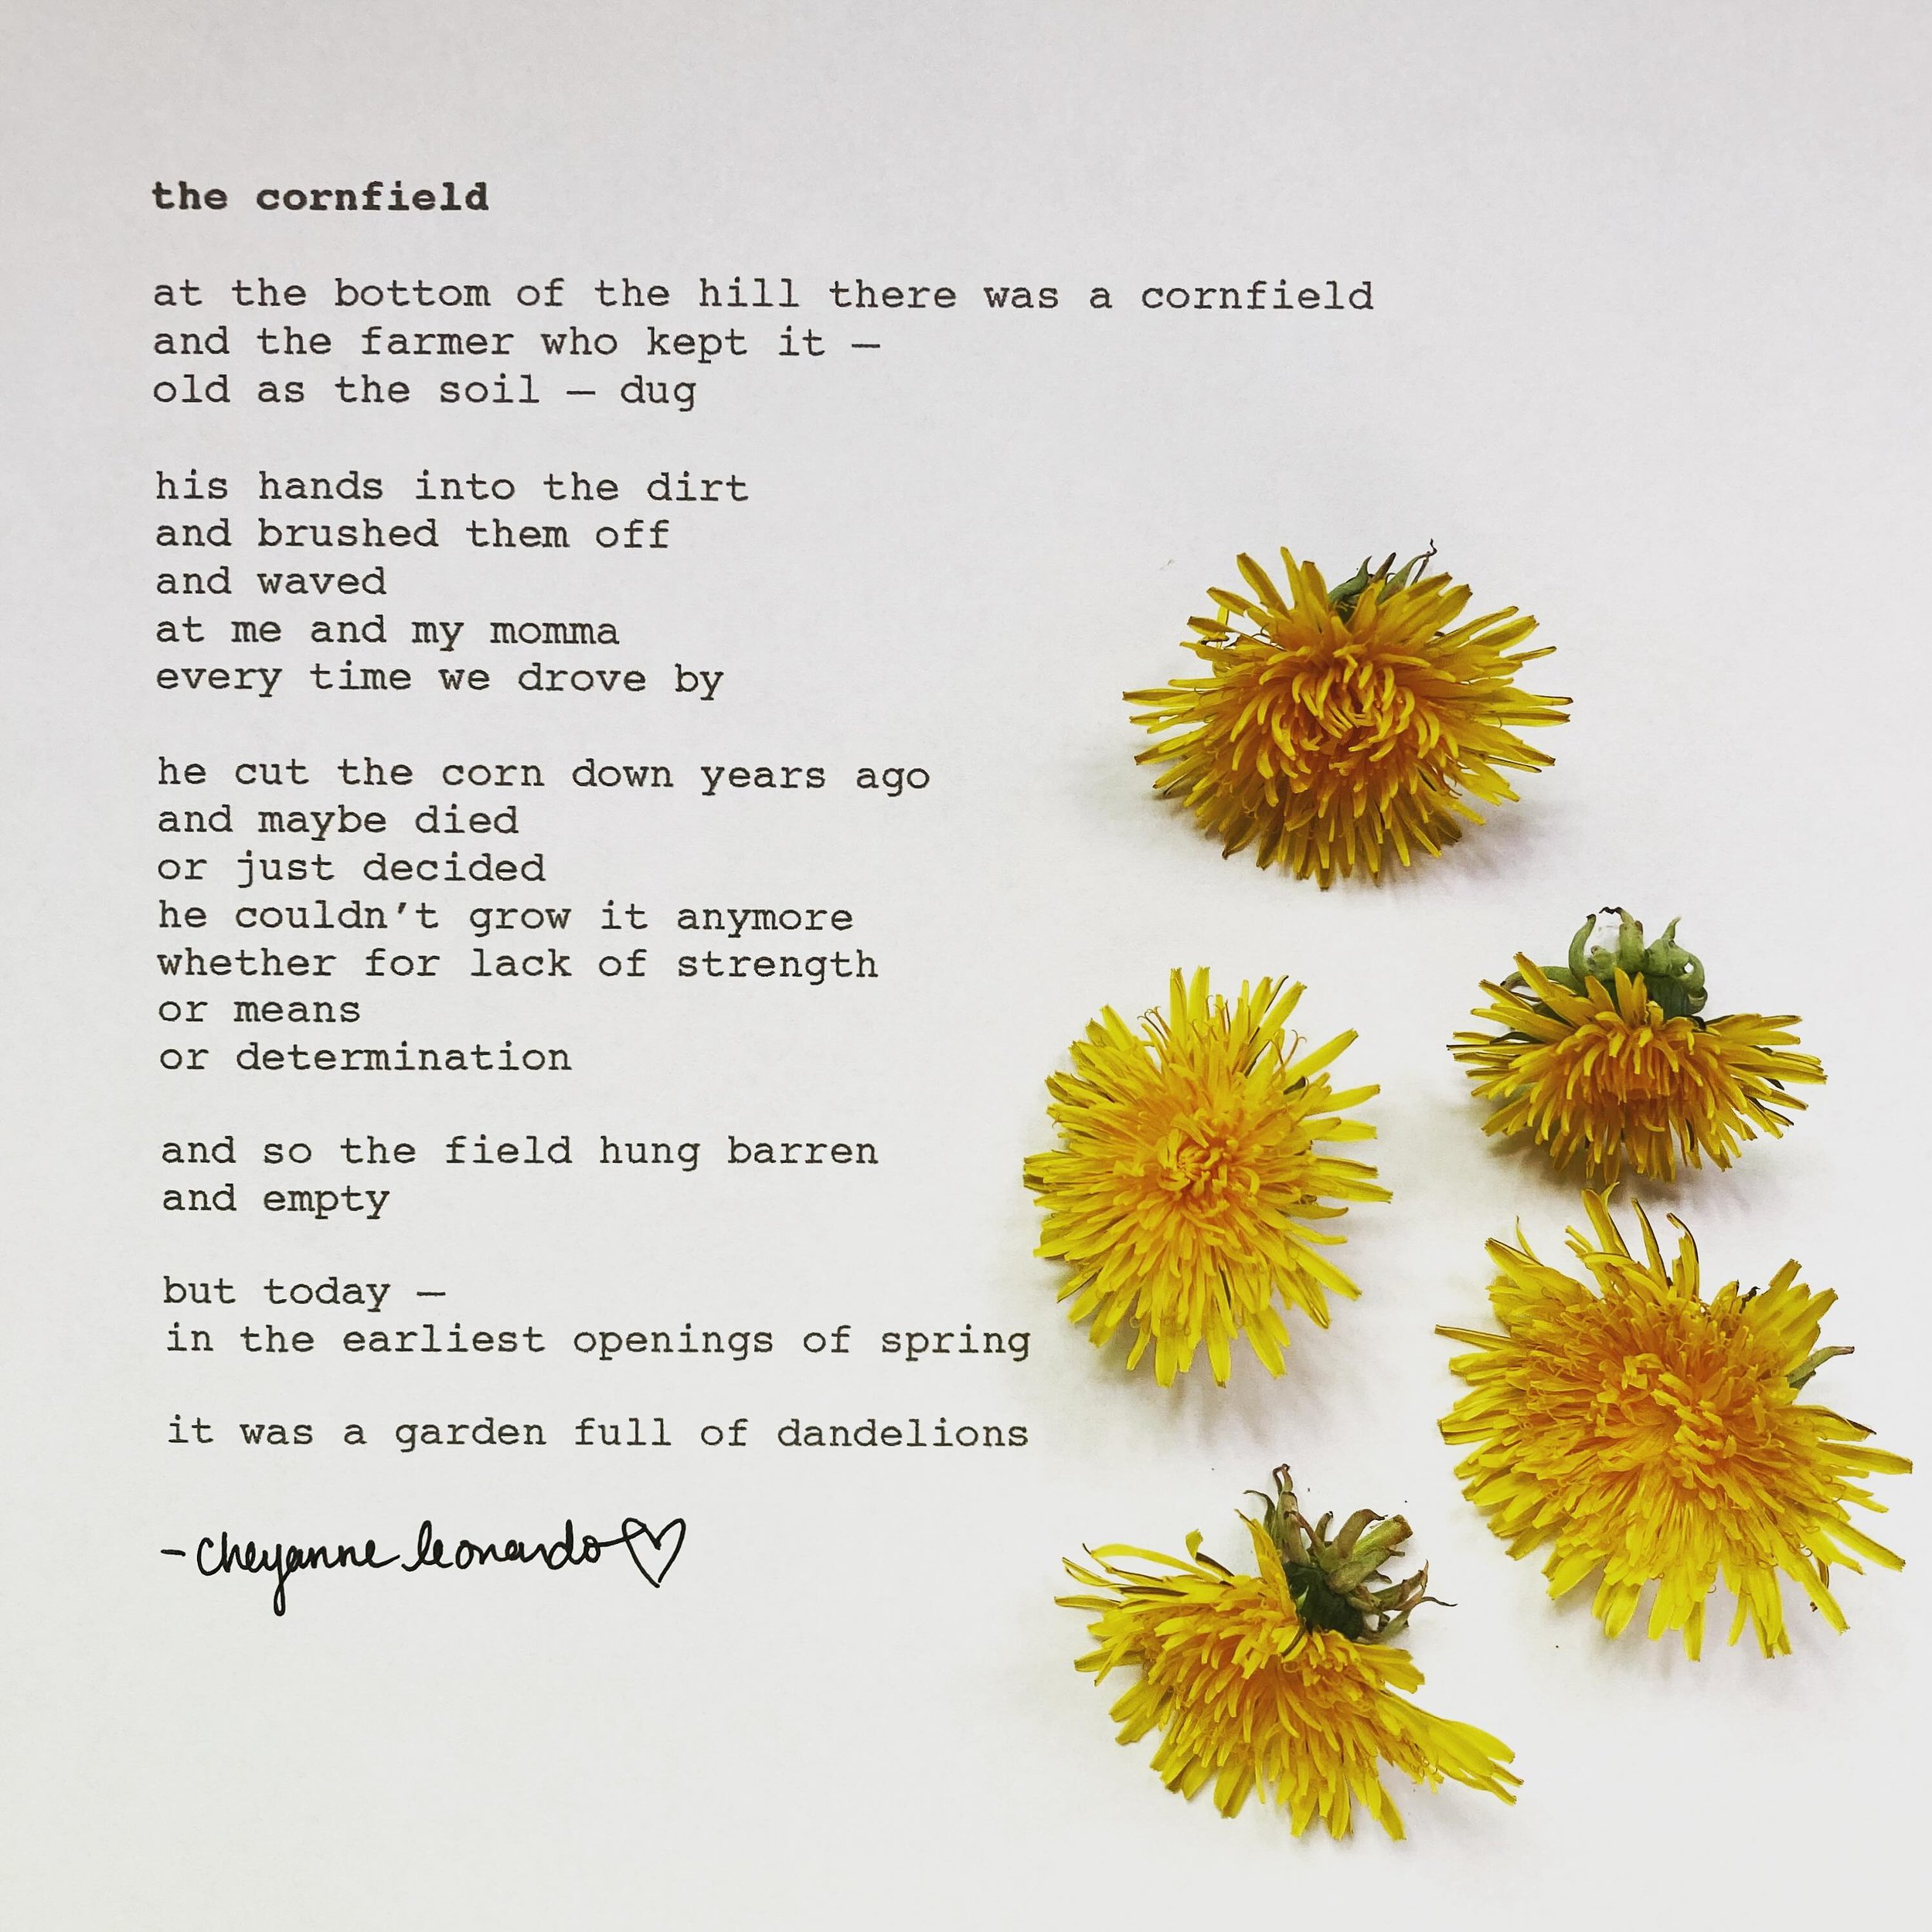 hey dandelions! heads up: we are hoping to open submissions as early as THIS MONDAY! keep your eyes open for our announcement. in the meantime, enjoy &lsquo;the cornfield&rsquo; by cheyanne leonardo 🌼
lots of love, and we wish you a good weekend!!! 